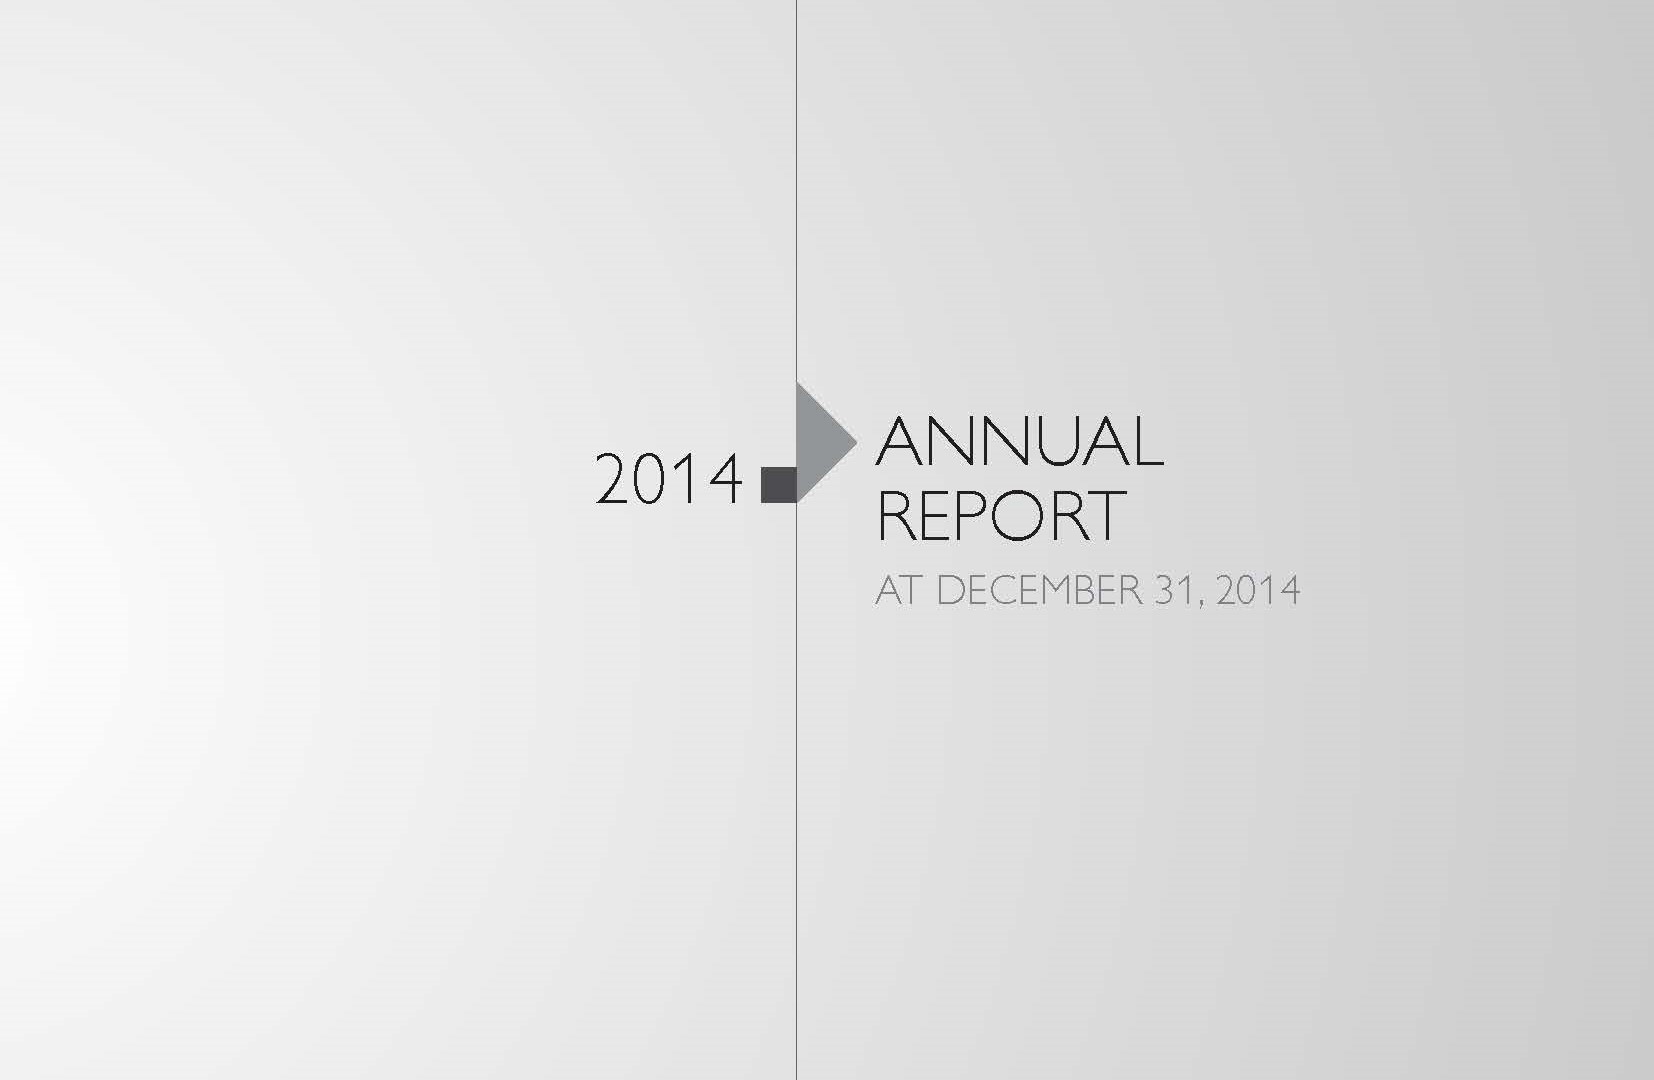 CNH Industrial Annual Report 2014